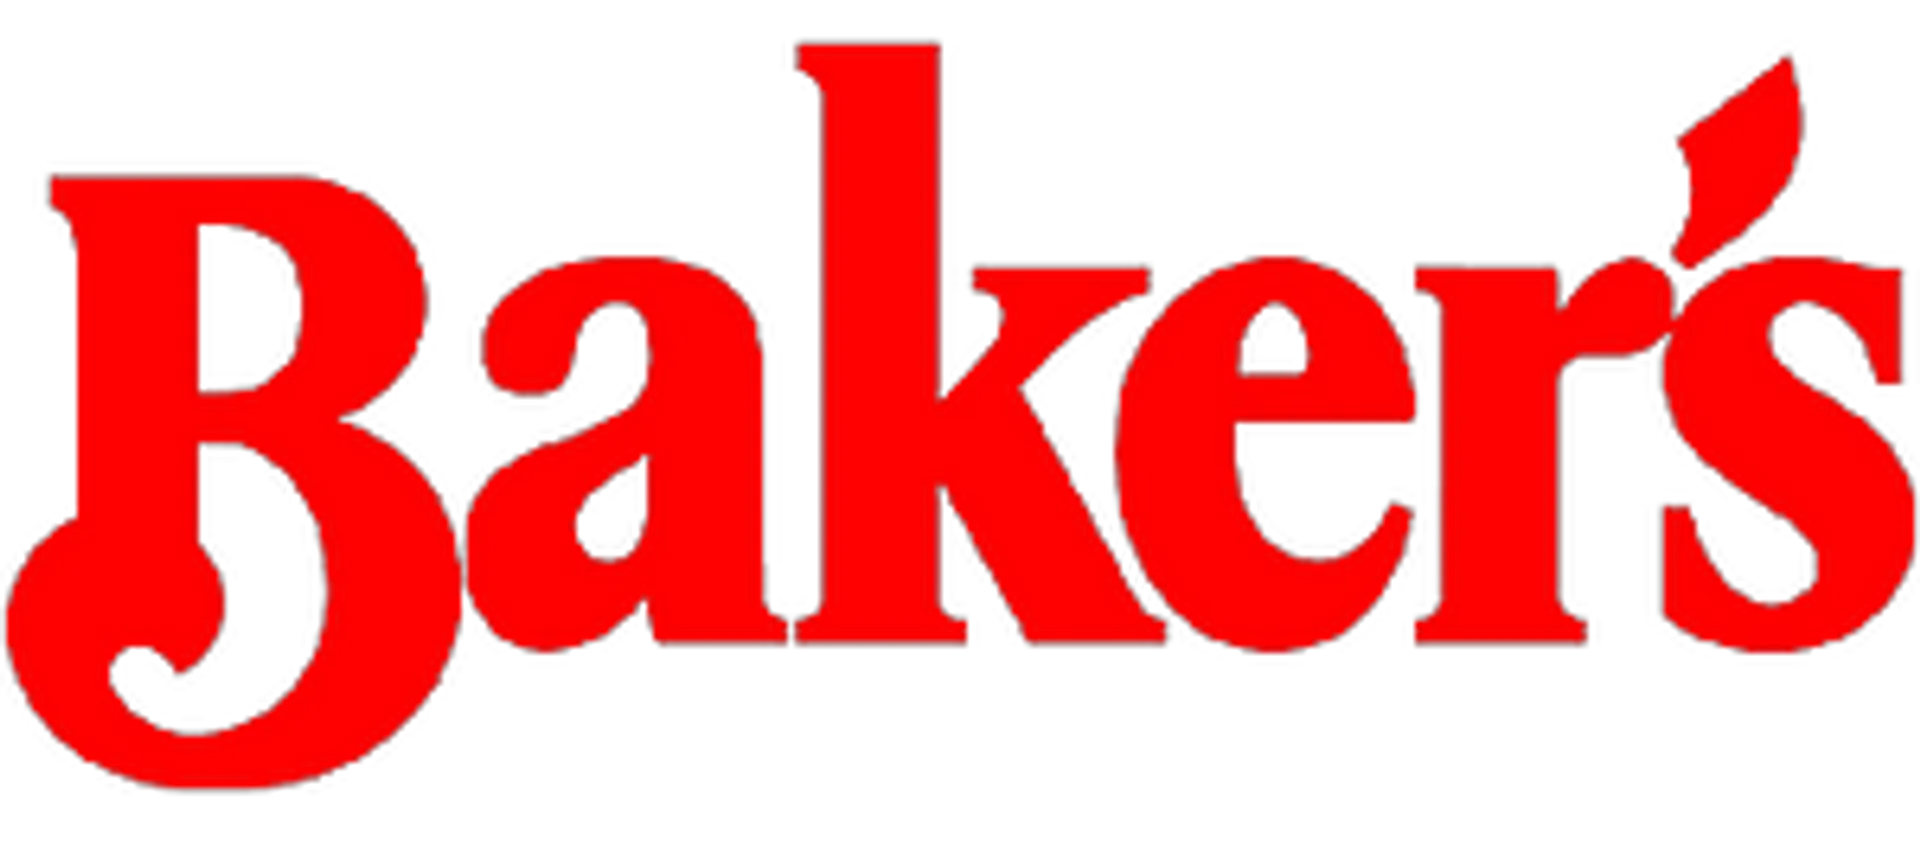 BAKER'S logo. Current weekly ad